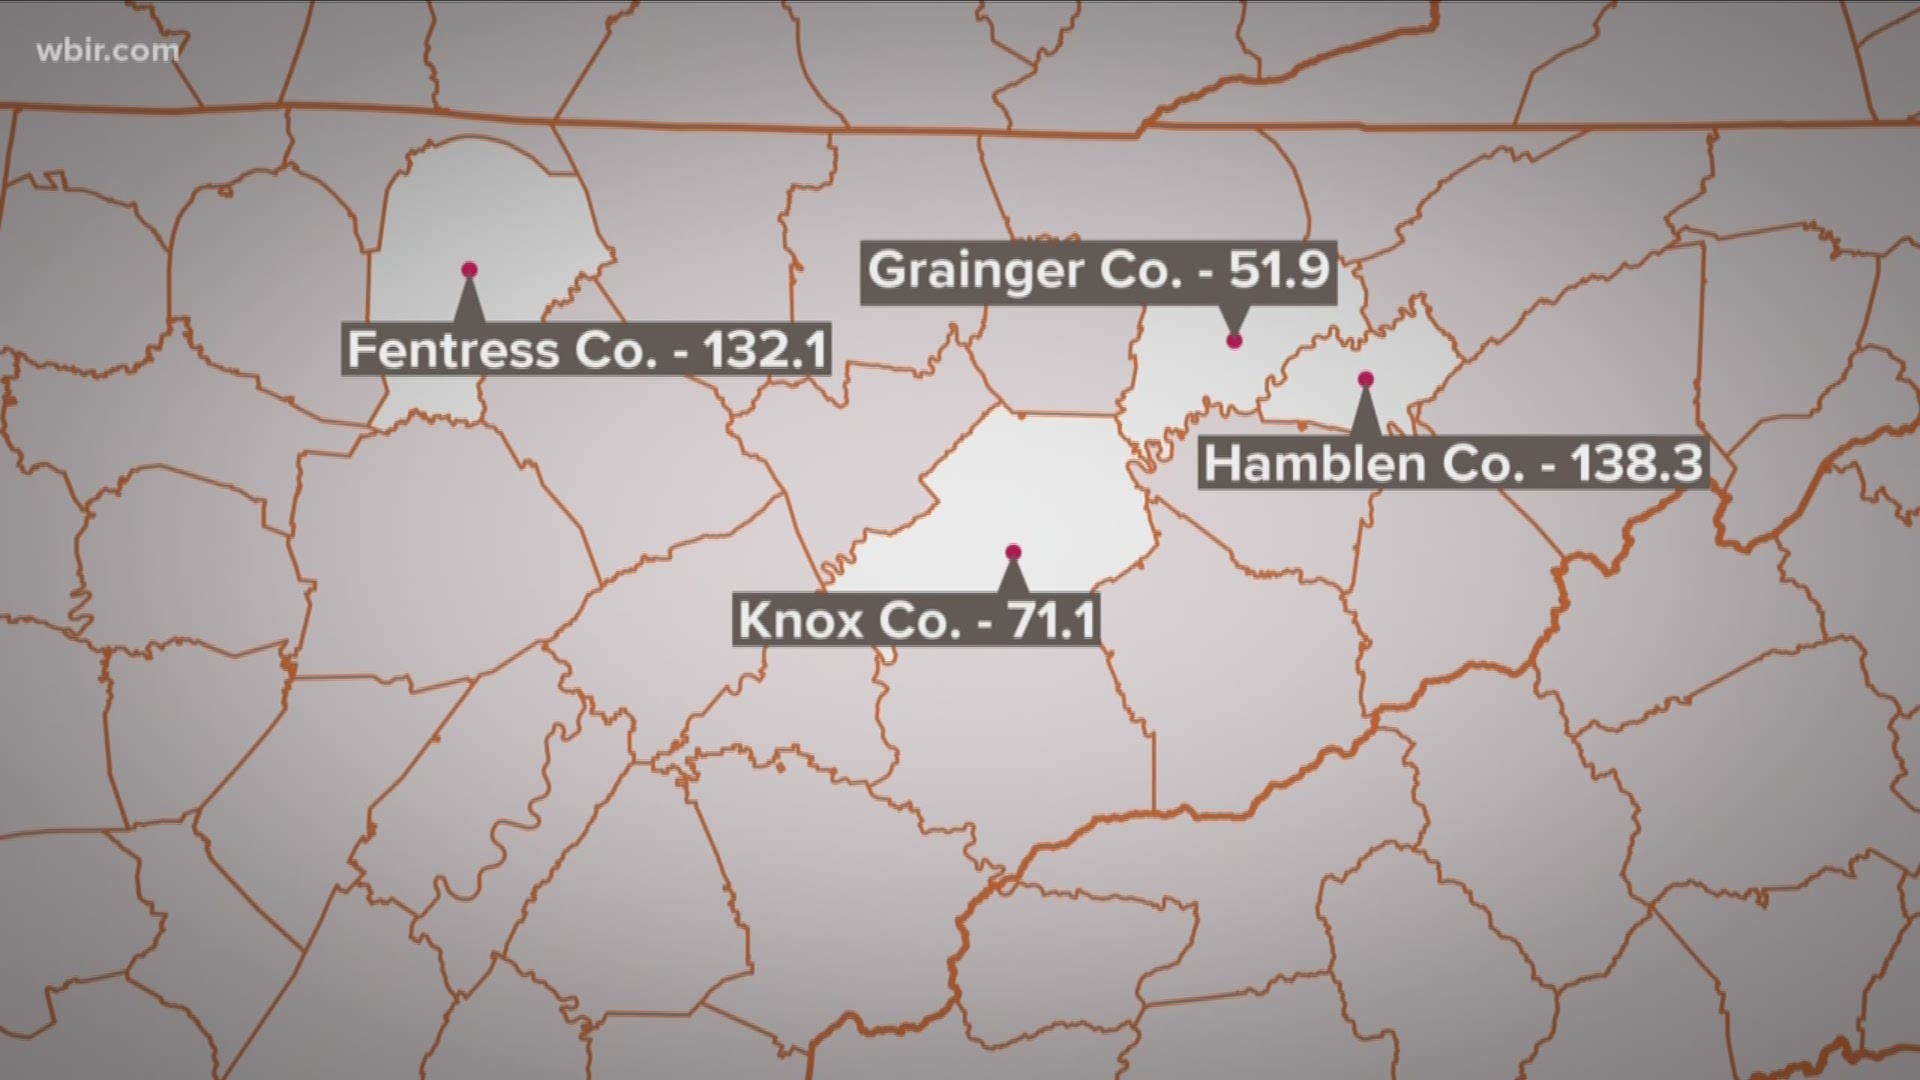 Fentress and Hamblen Counties lead the region with more than 130 pills distributed per person per year on average, the study found.